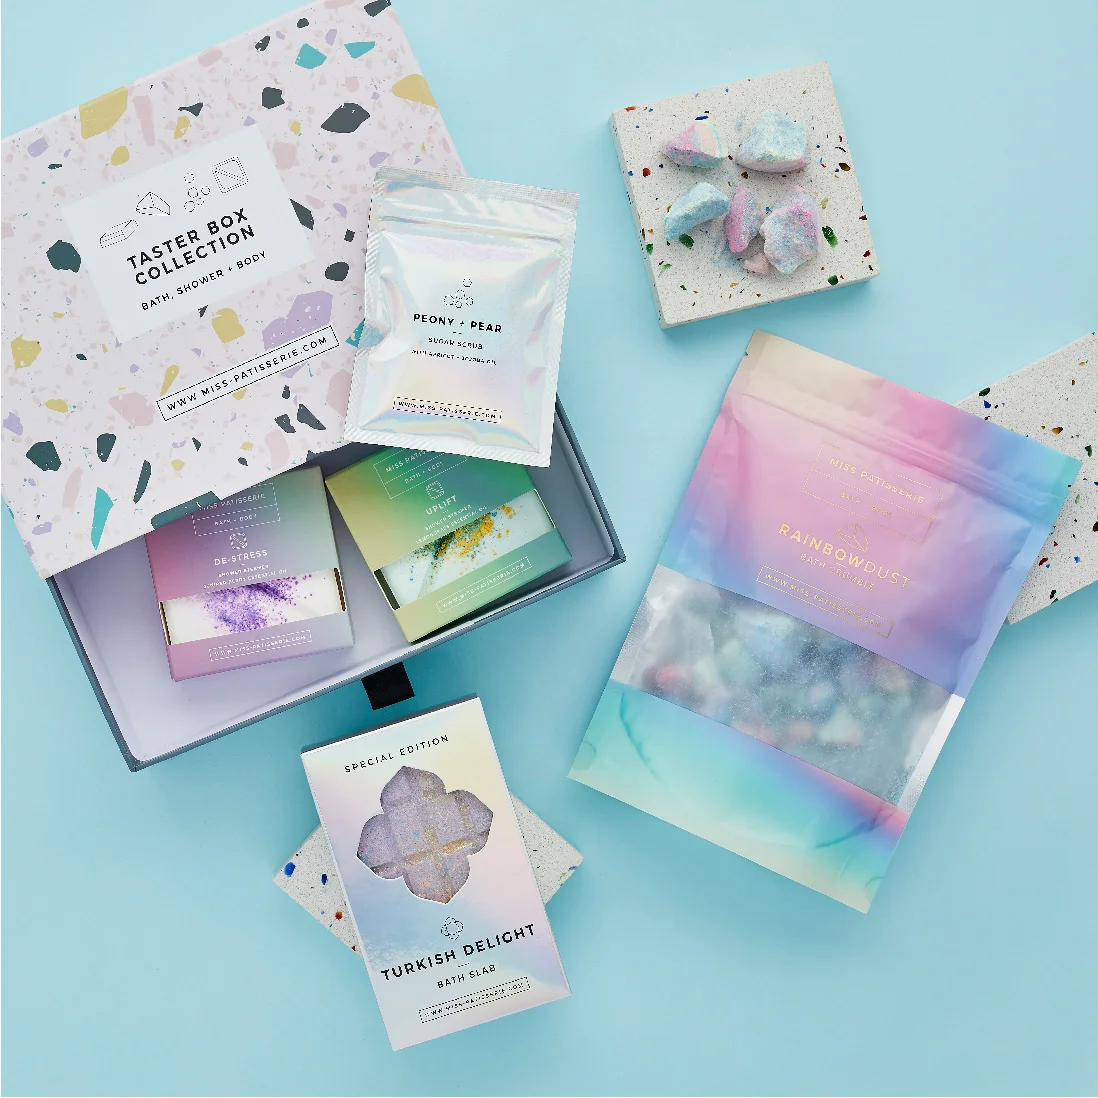 An assortment of colorful bath products displayed on a website designed by a top design agency in Wales, including pouches labeled 'rainbow dust' and 'pony pop', and bars of soap decorated with